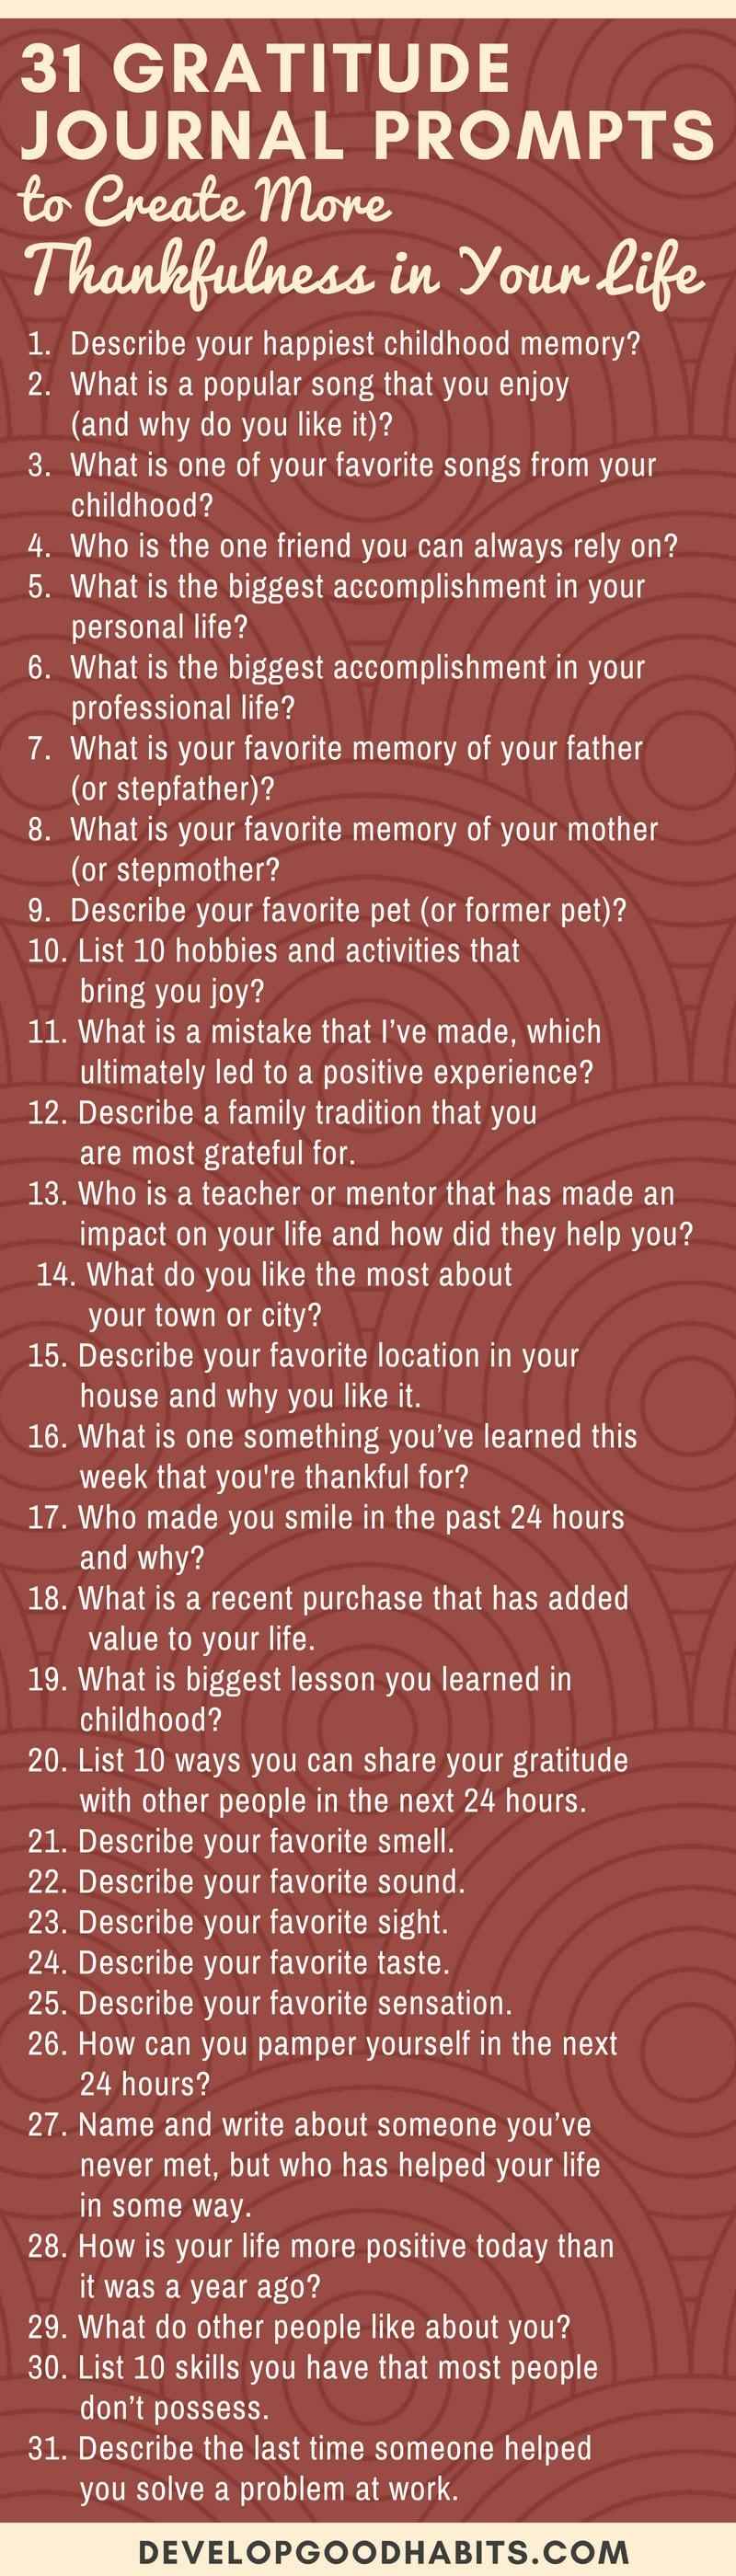 155 Gratitude Journal Prompts to Create More Thankfulness in Your Life